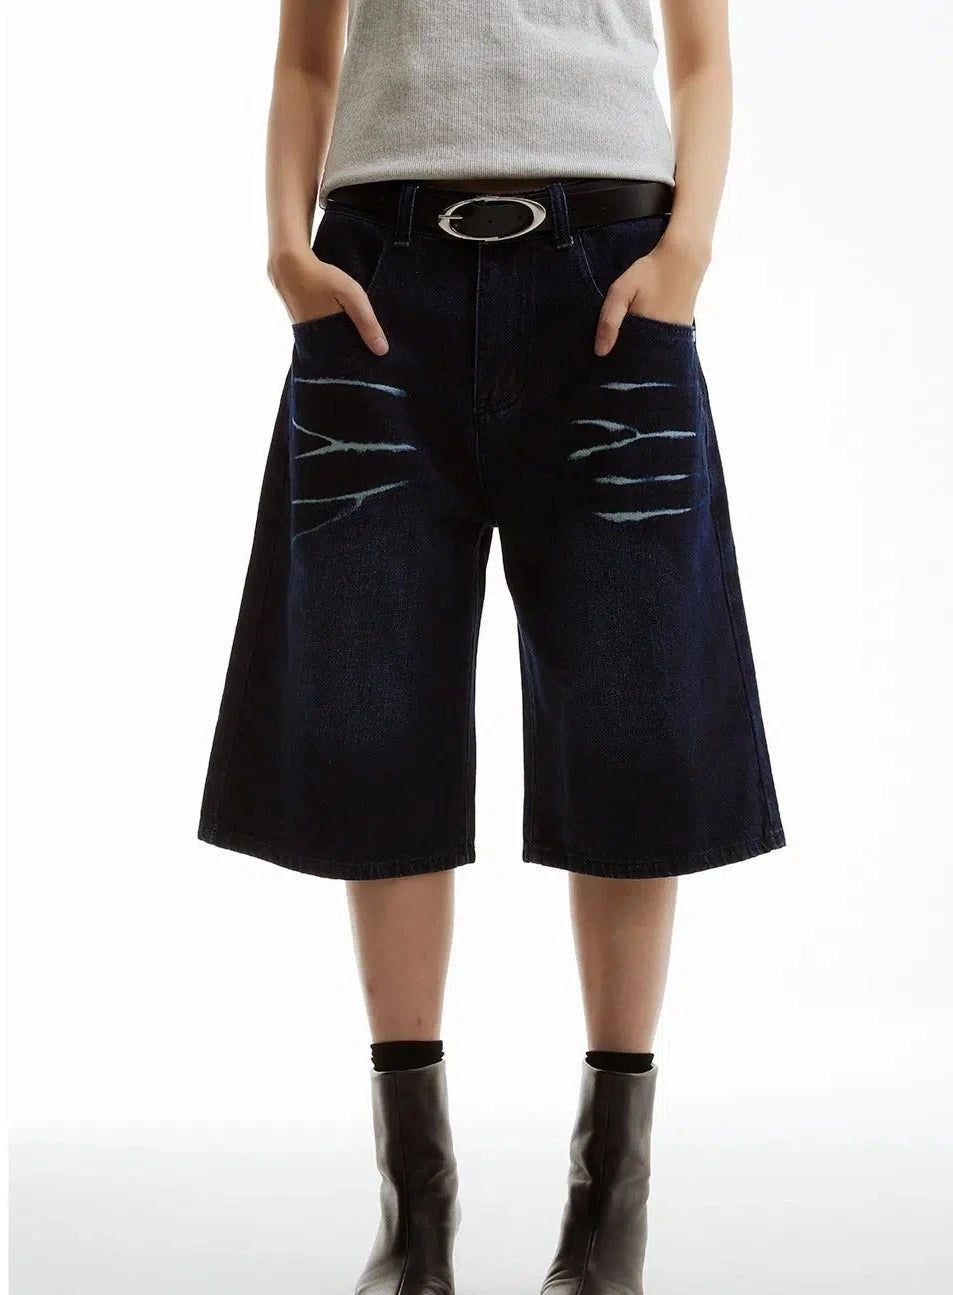 Whisker Lines Denim Shorts Korean Street Fashion Shorts By Funky Fun Shop Online at OH Vault